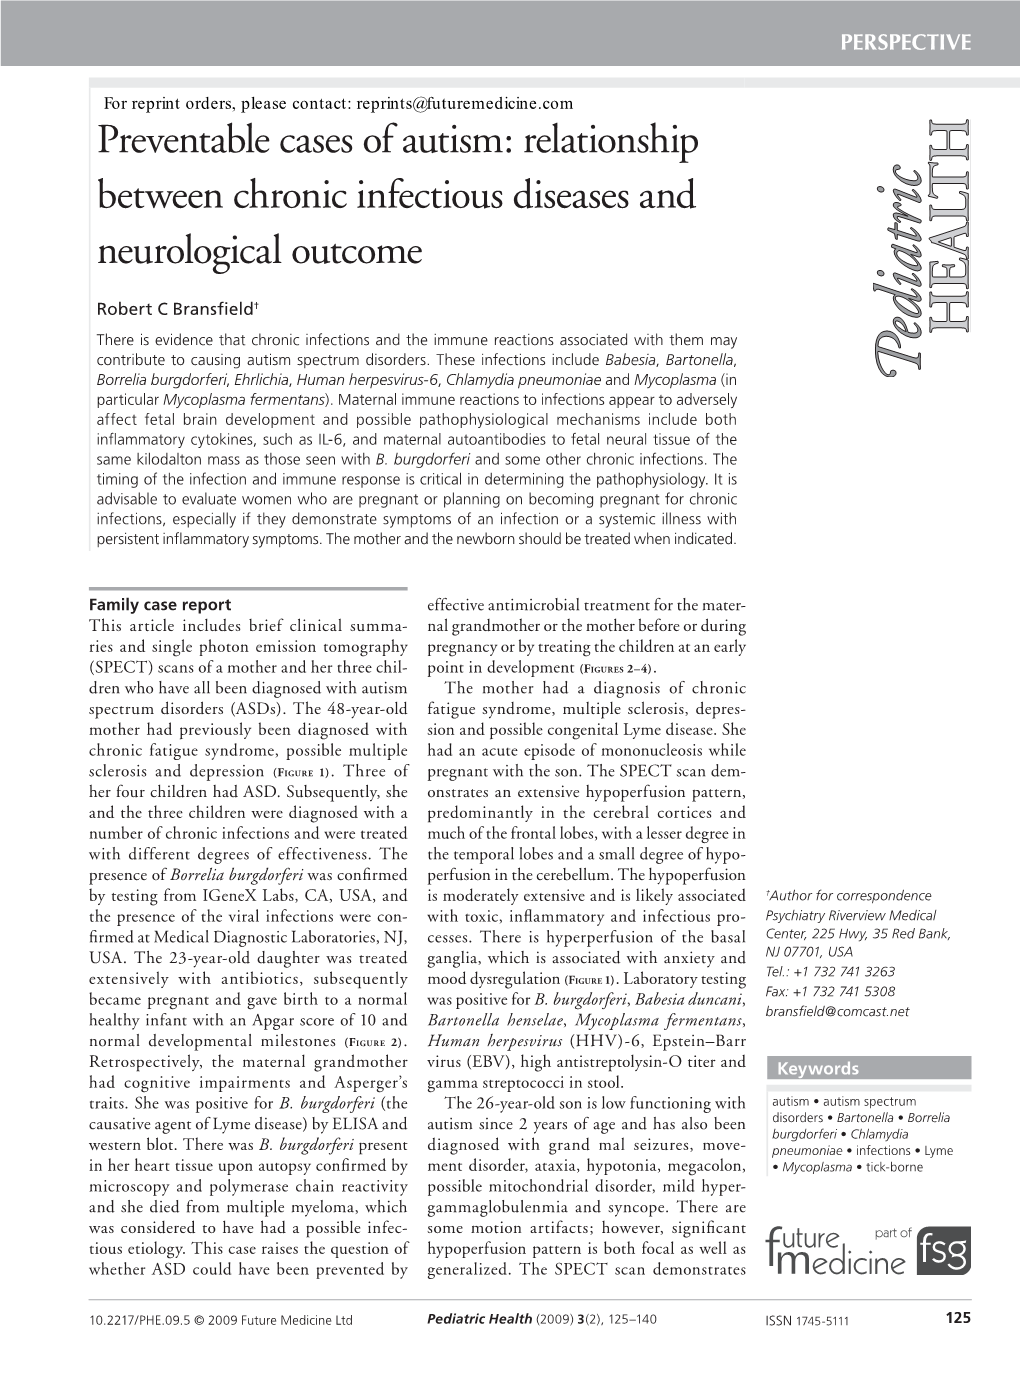 Preventable Cases of Autism: Relationship Between Chronic Infectious Diseases and Neurological Outcome